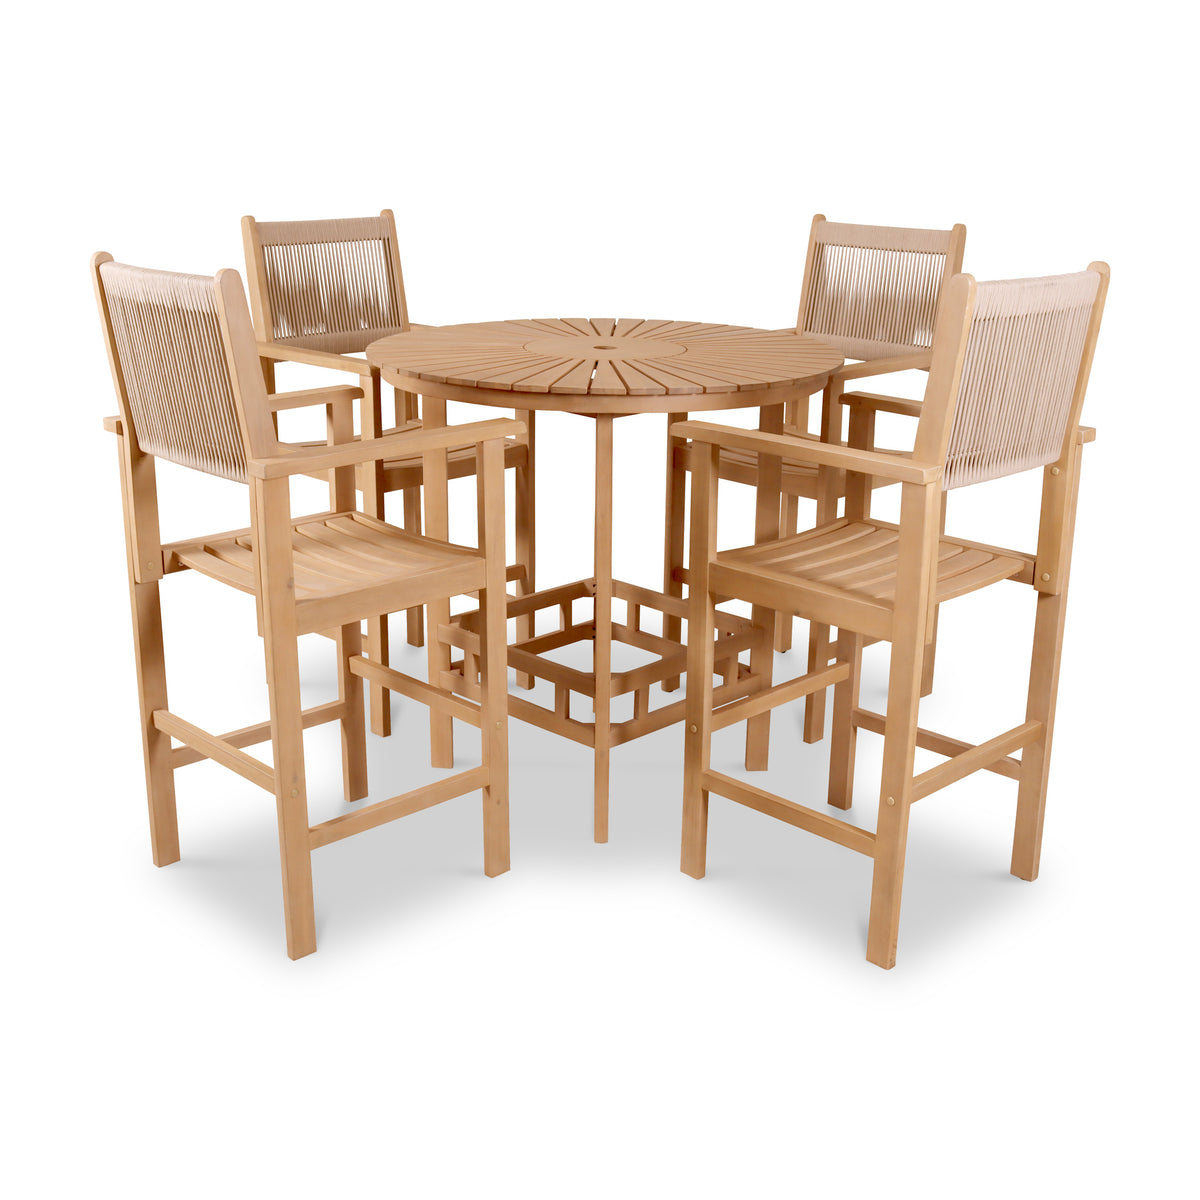 Roma FSC Bar 100cm High Table and 4 Rope Bar Stools from Roseland Furniture